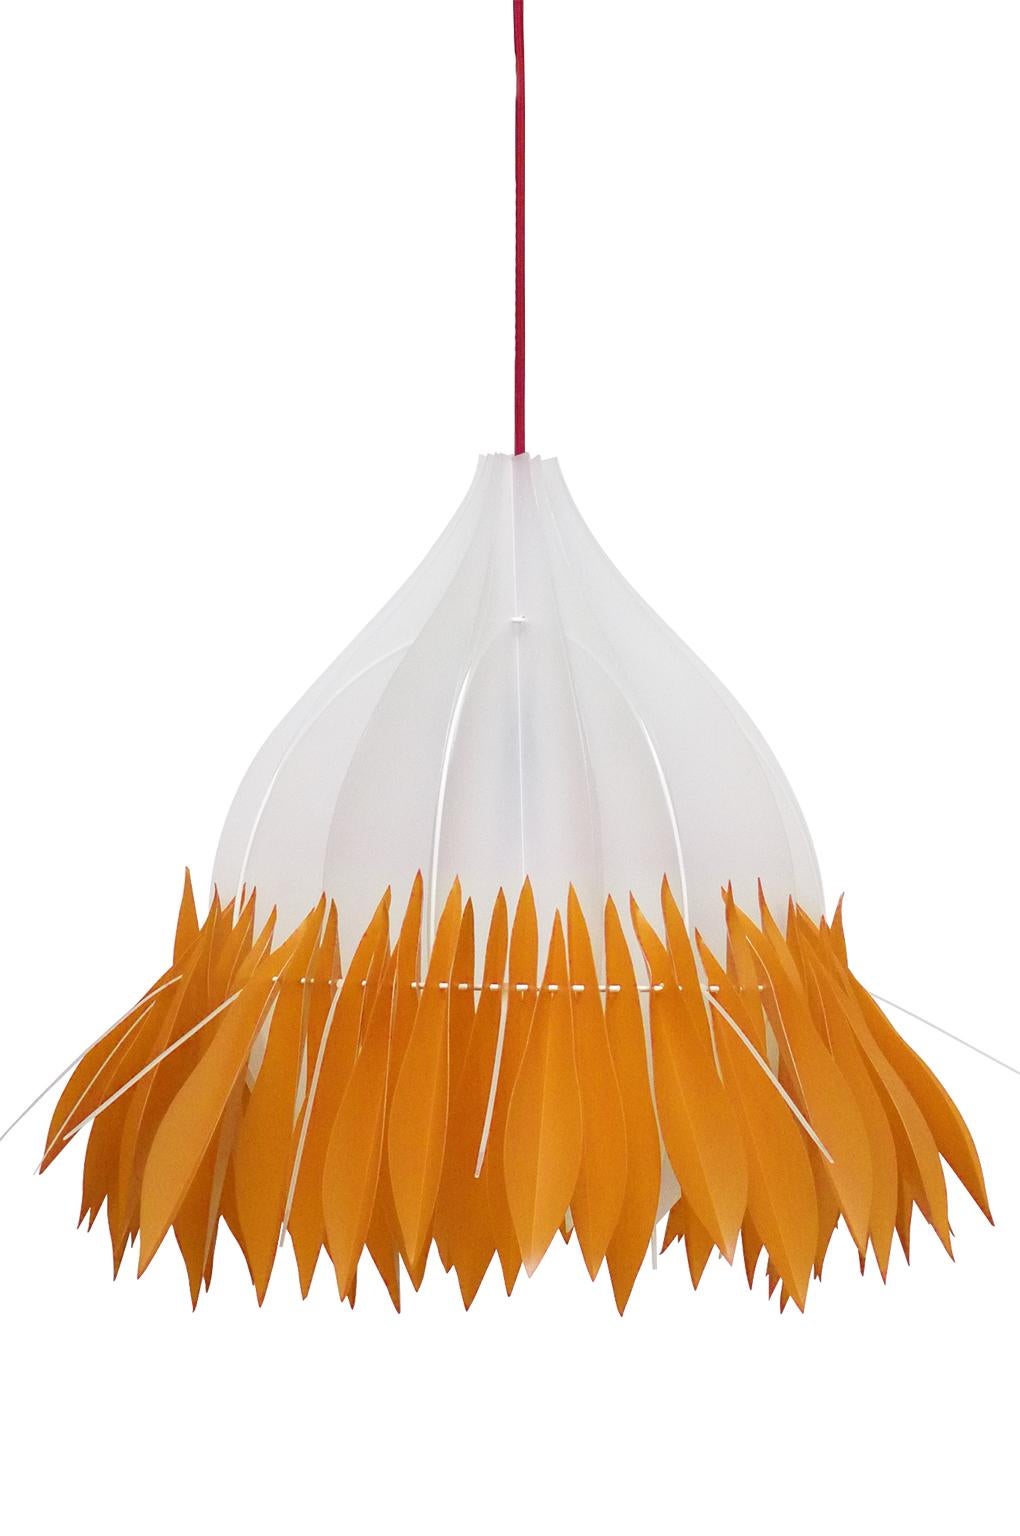 White and red organic modern chandelier pendant made on polypropylène created by thé artist
E 27 15w maxi 750 Lumen
Measures: Diameter of structure: 13.77inches deployed : 16.53/18.11 inches
Height 14.96 i. Weight 1kg400
Colors: White and red.